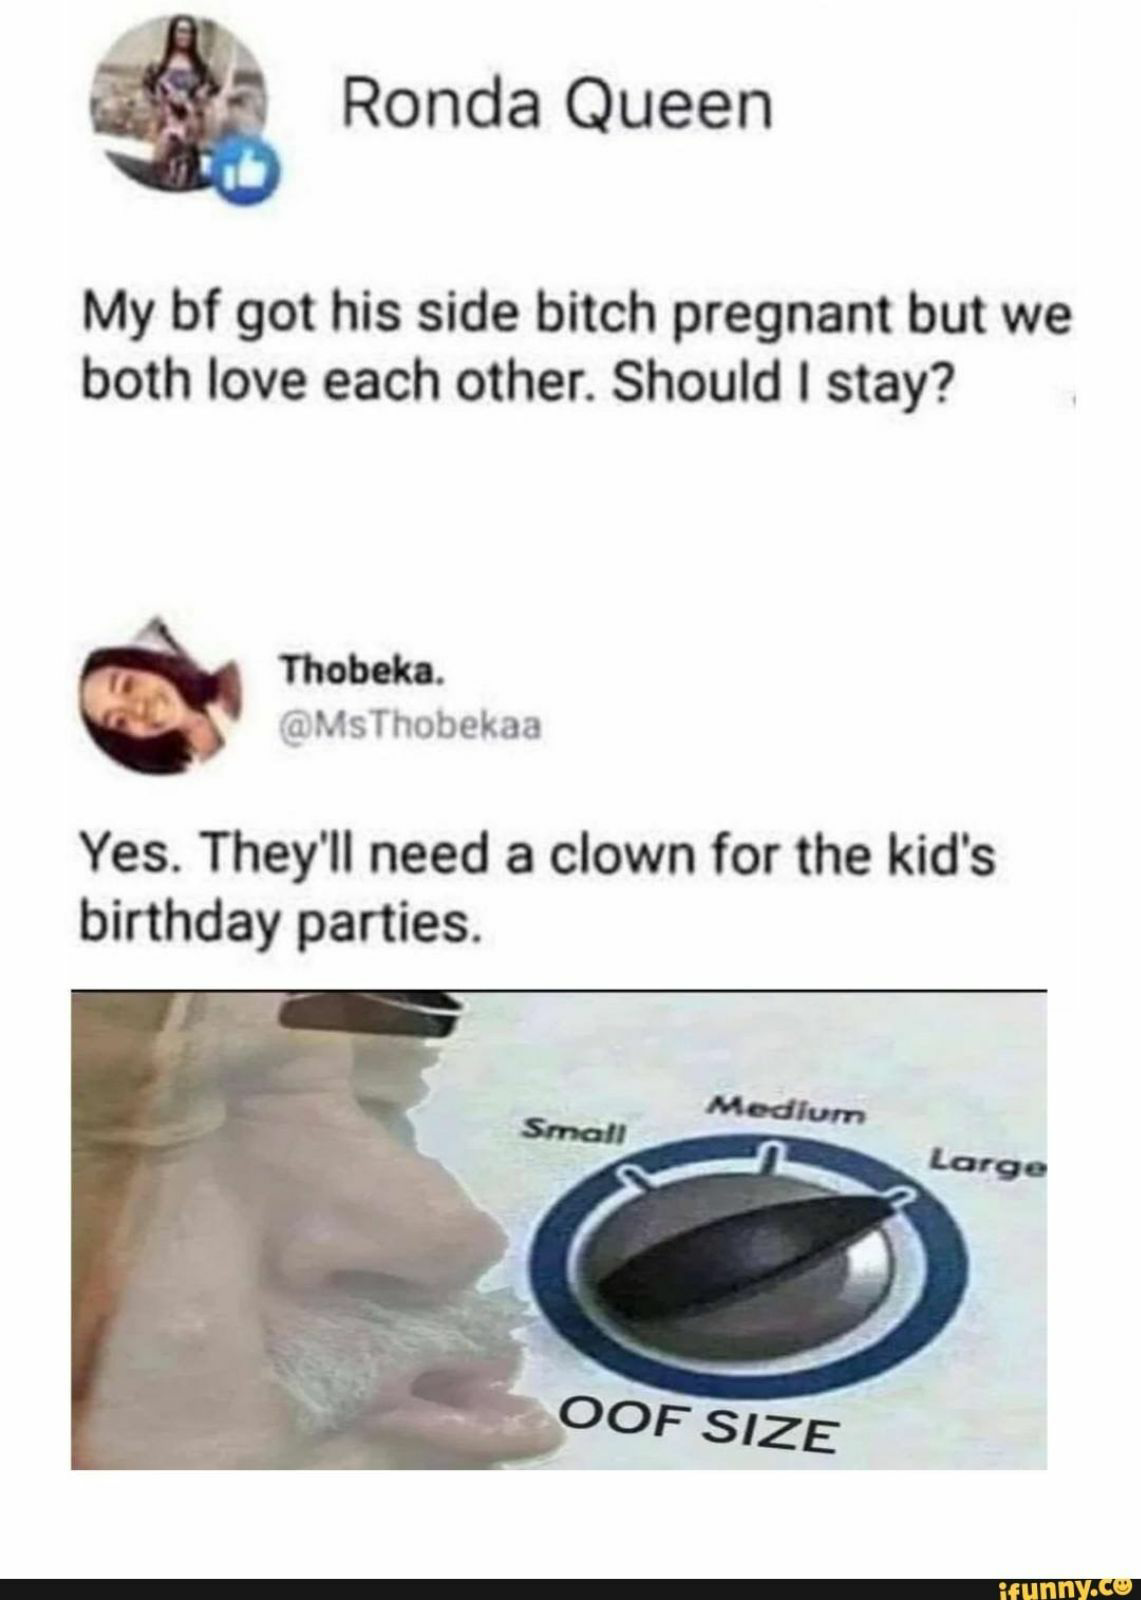 my boyfriend got his side bitch pregnant meme - Ronda Queen My bf got his side bitch pregnant but we both love each other. Should I stay? Thobeka. Yes. They'll need a clown for the kid's birthday parties. Medium Small Large Oof Size